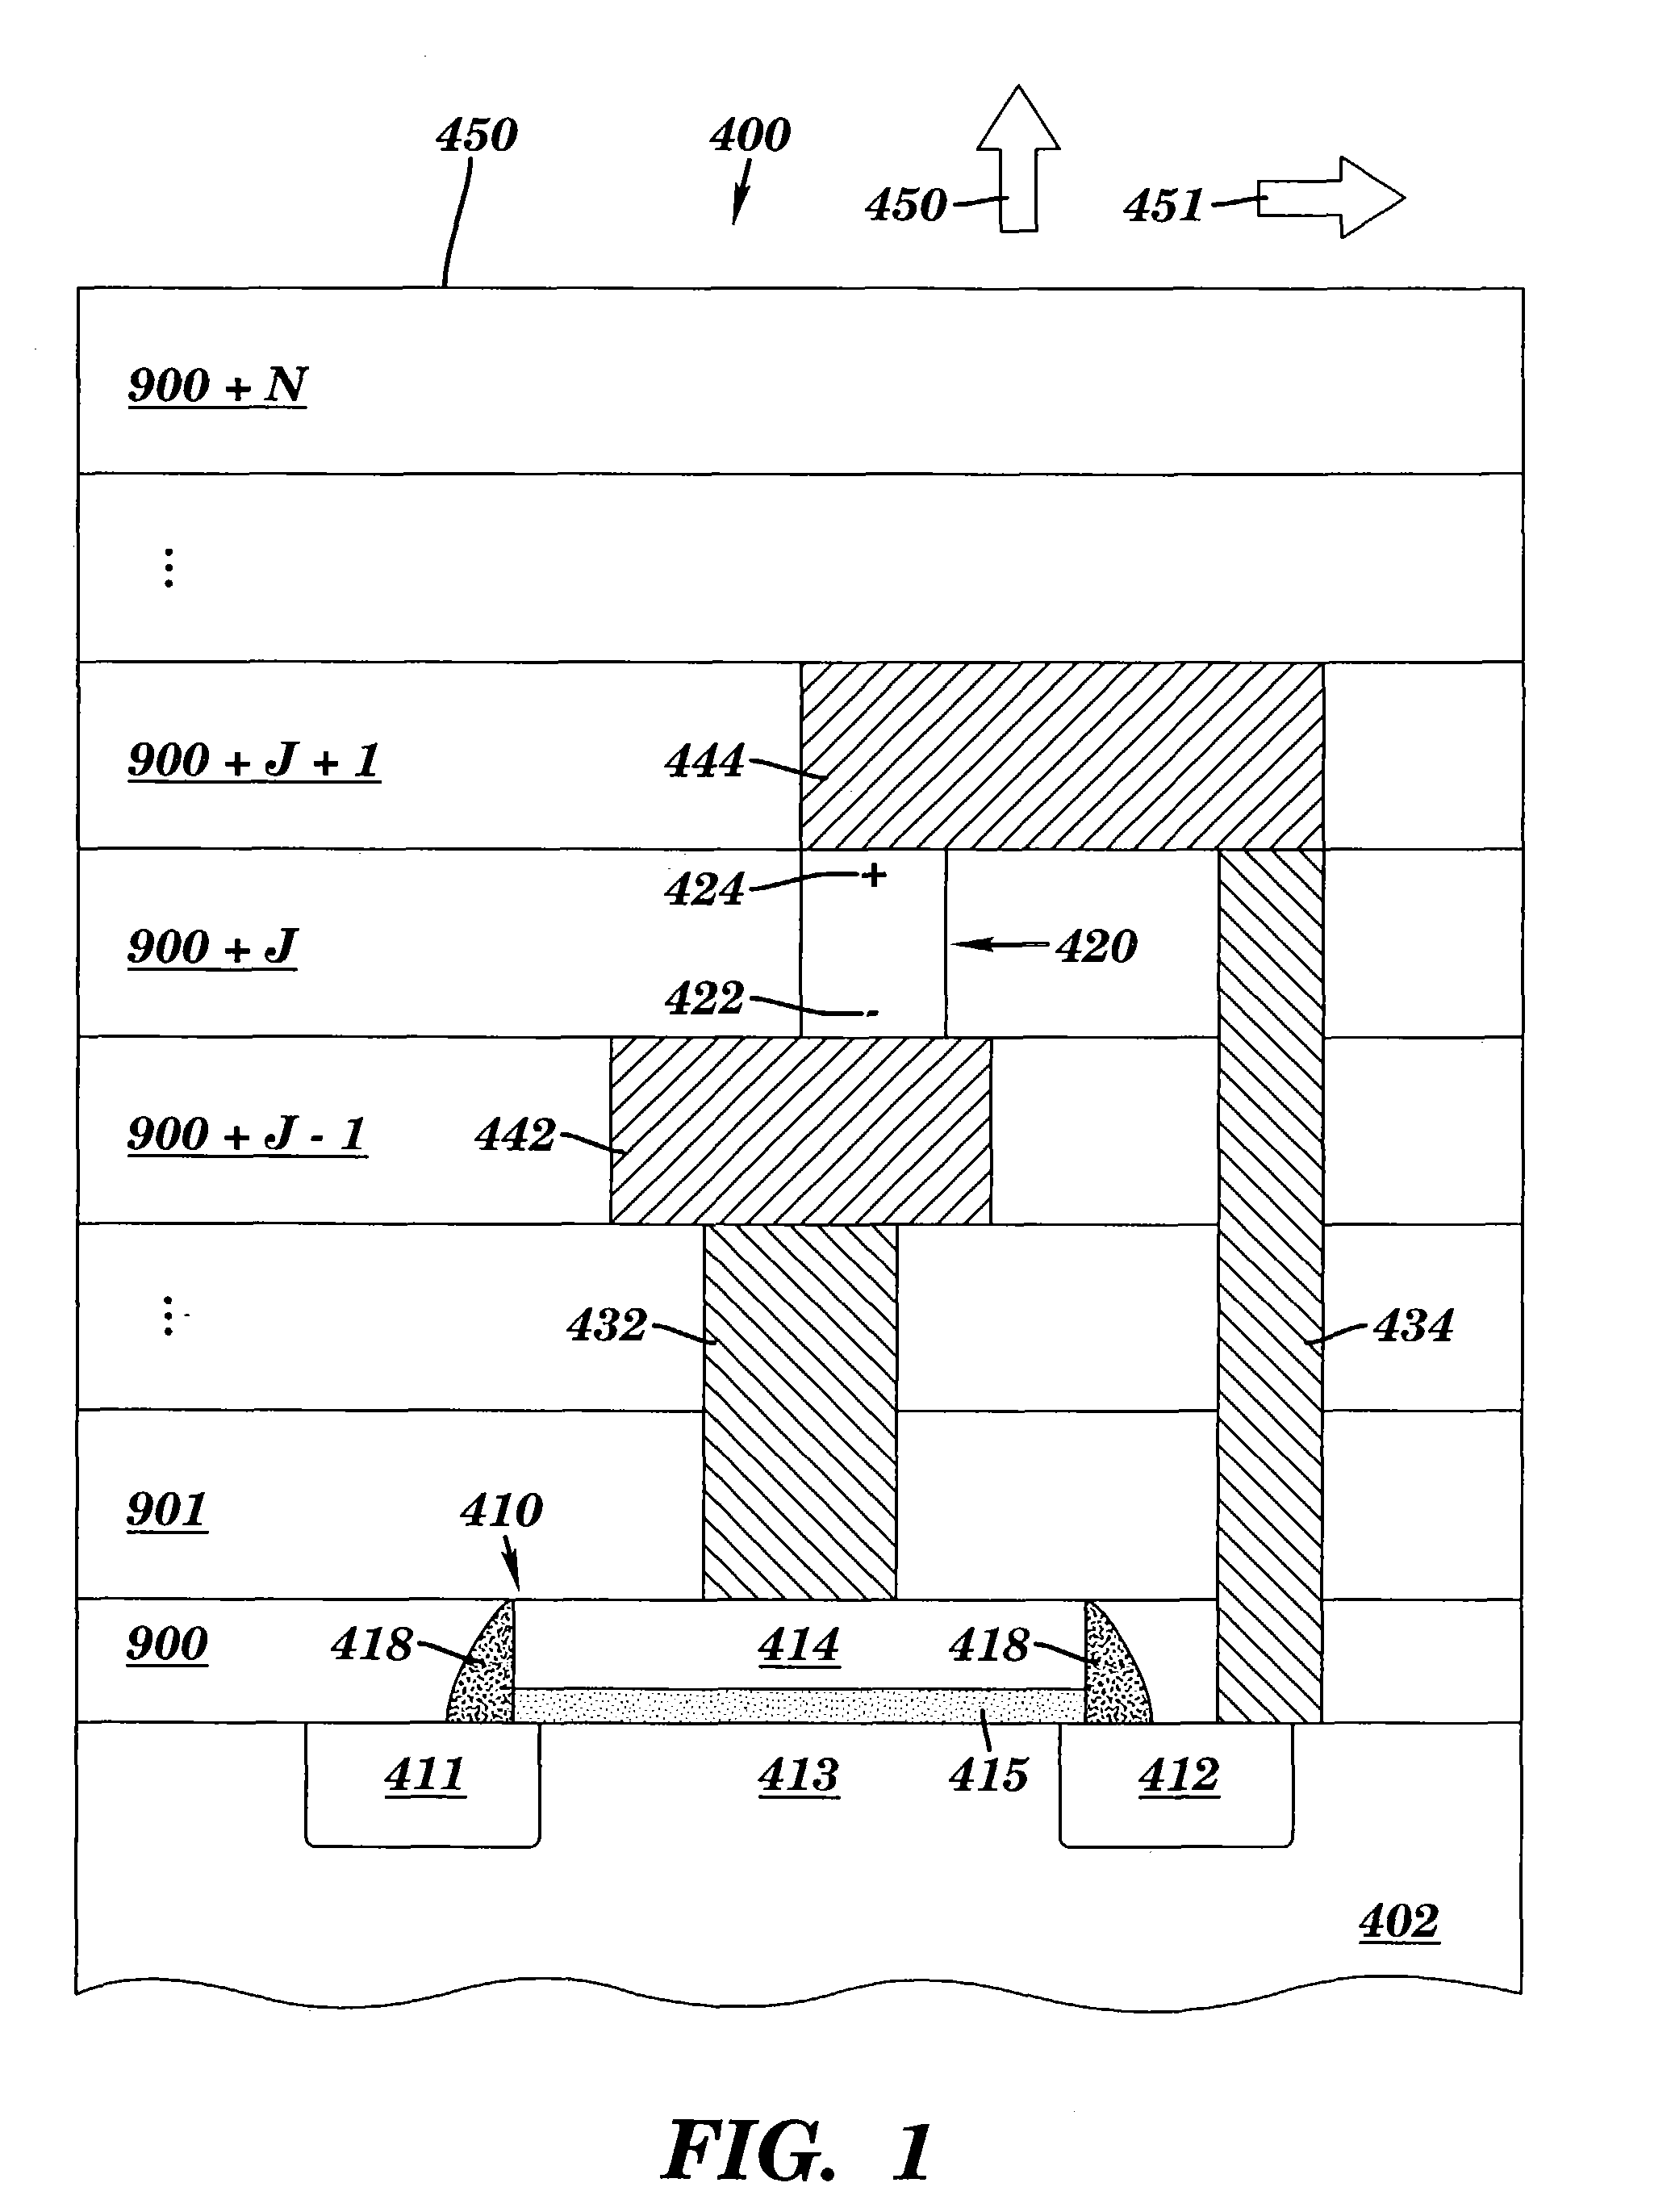 Apparatus and method for forming a battery in an integrated circuit